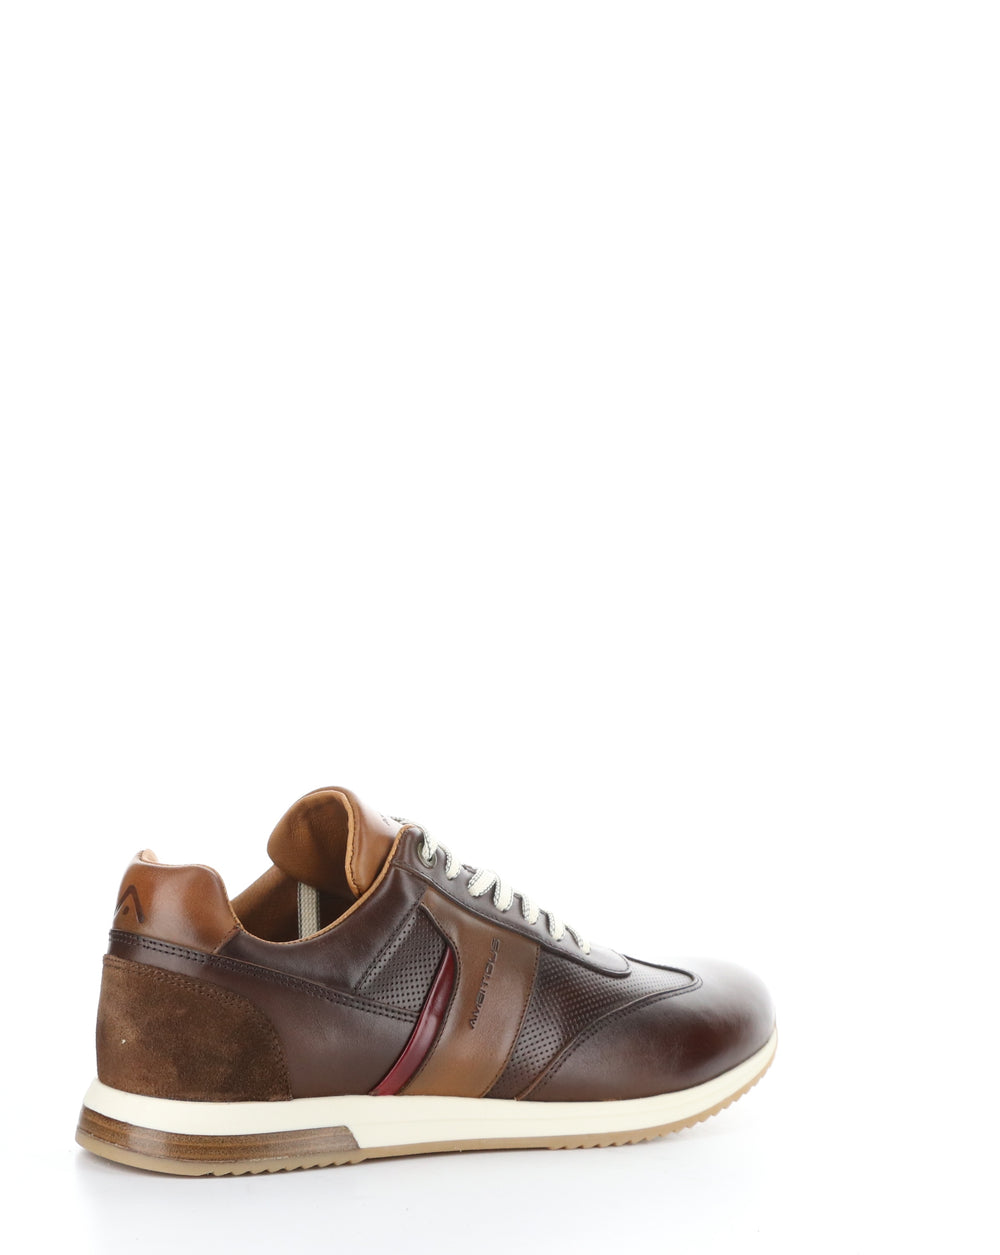 11319 TD MORO Lace-up Shoes